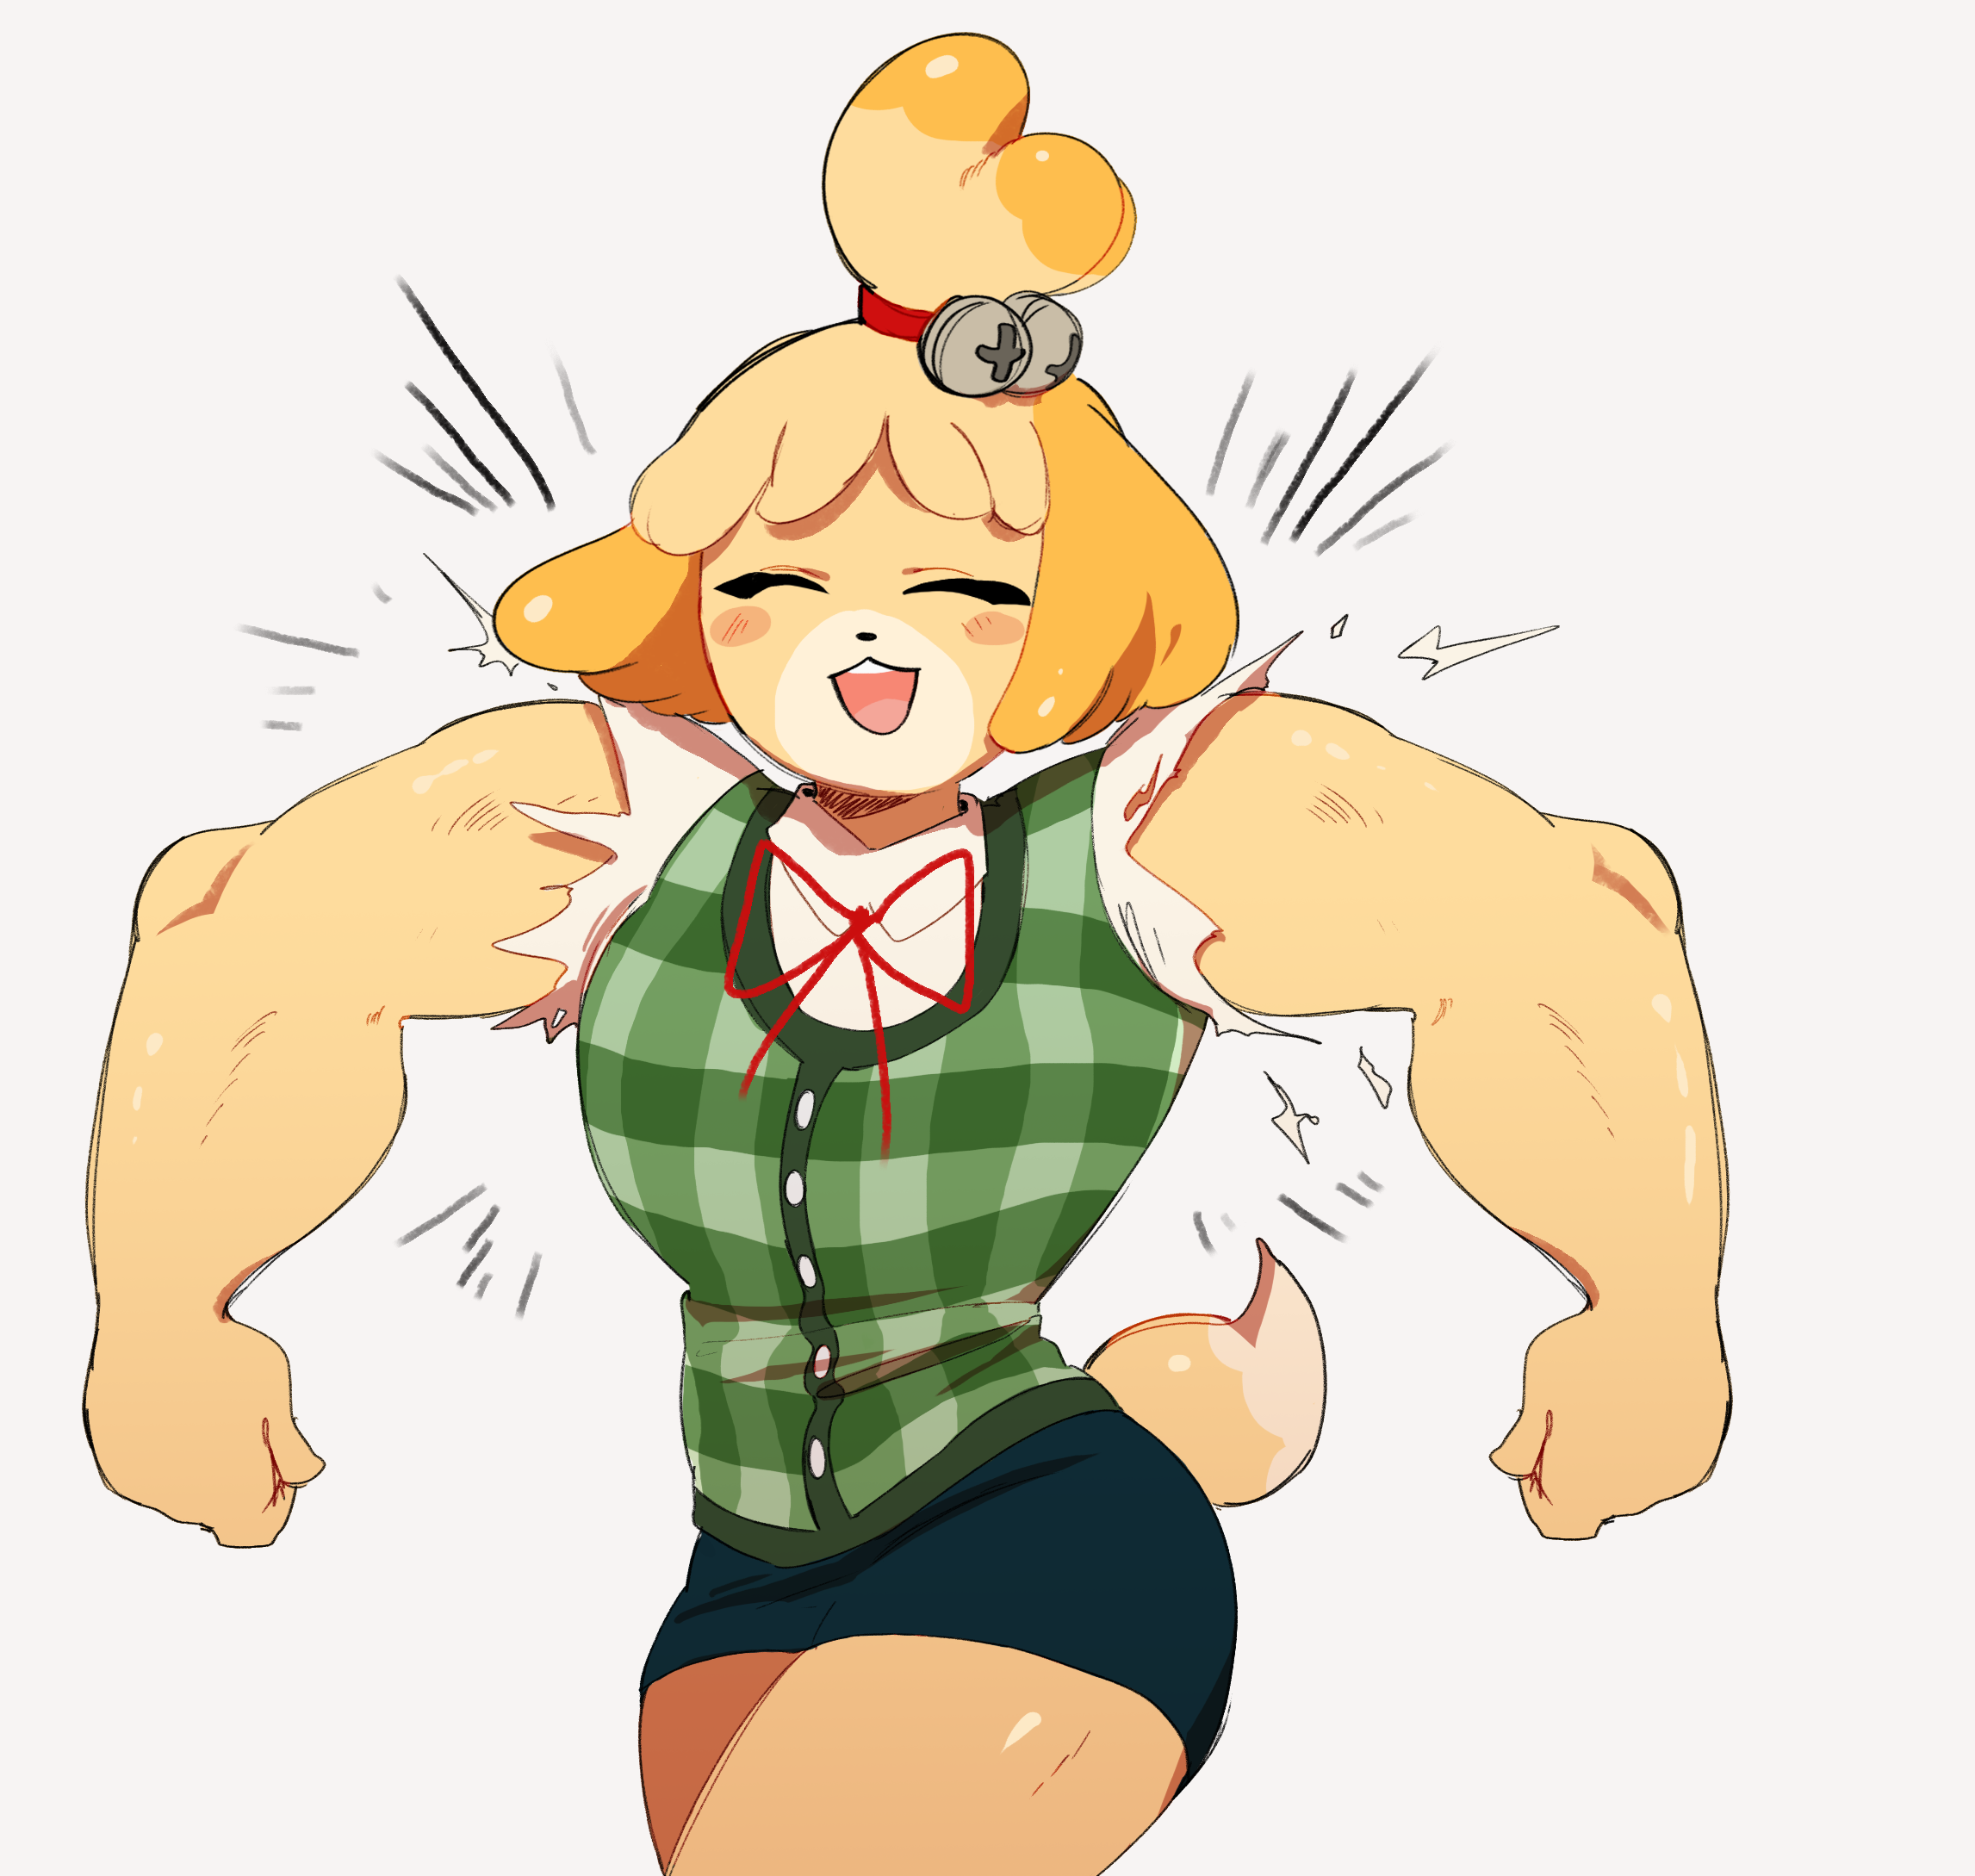 Anime 2293x2178 Isabelle (Animal Crossing) Animal Crossing New Horizons Zambiie muscles tail